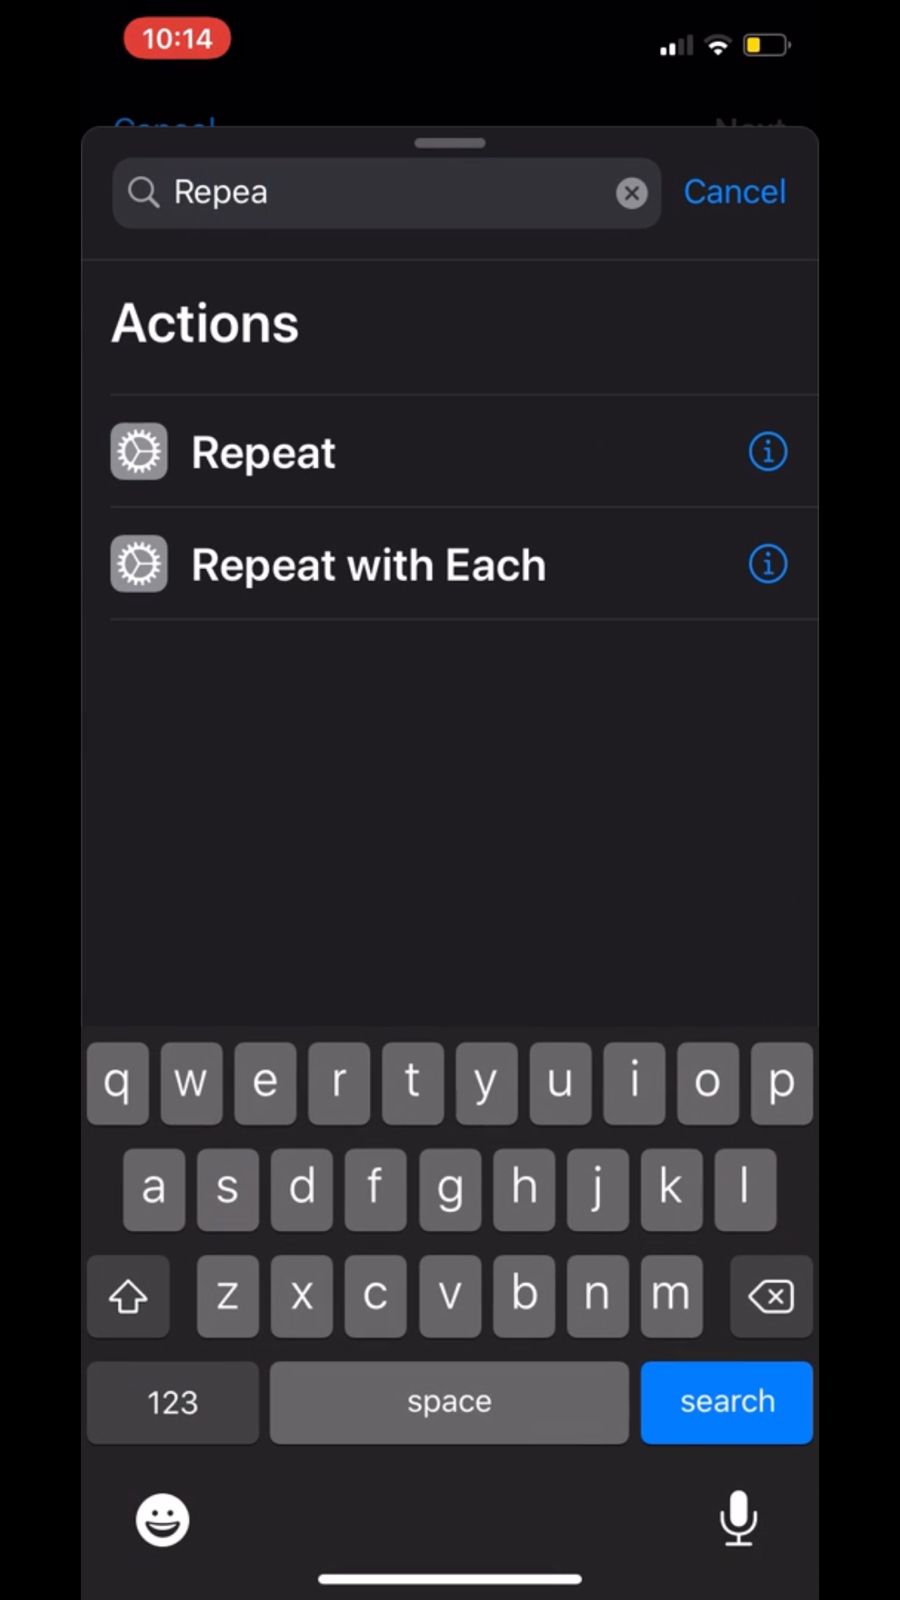 Choose “Add Action” from the menu.